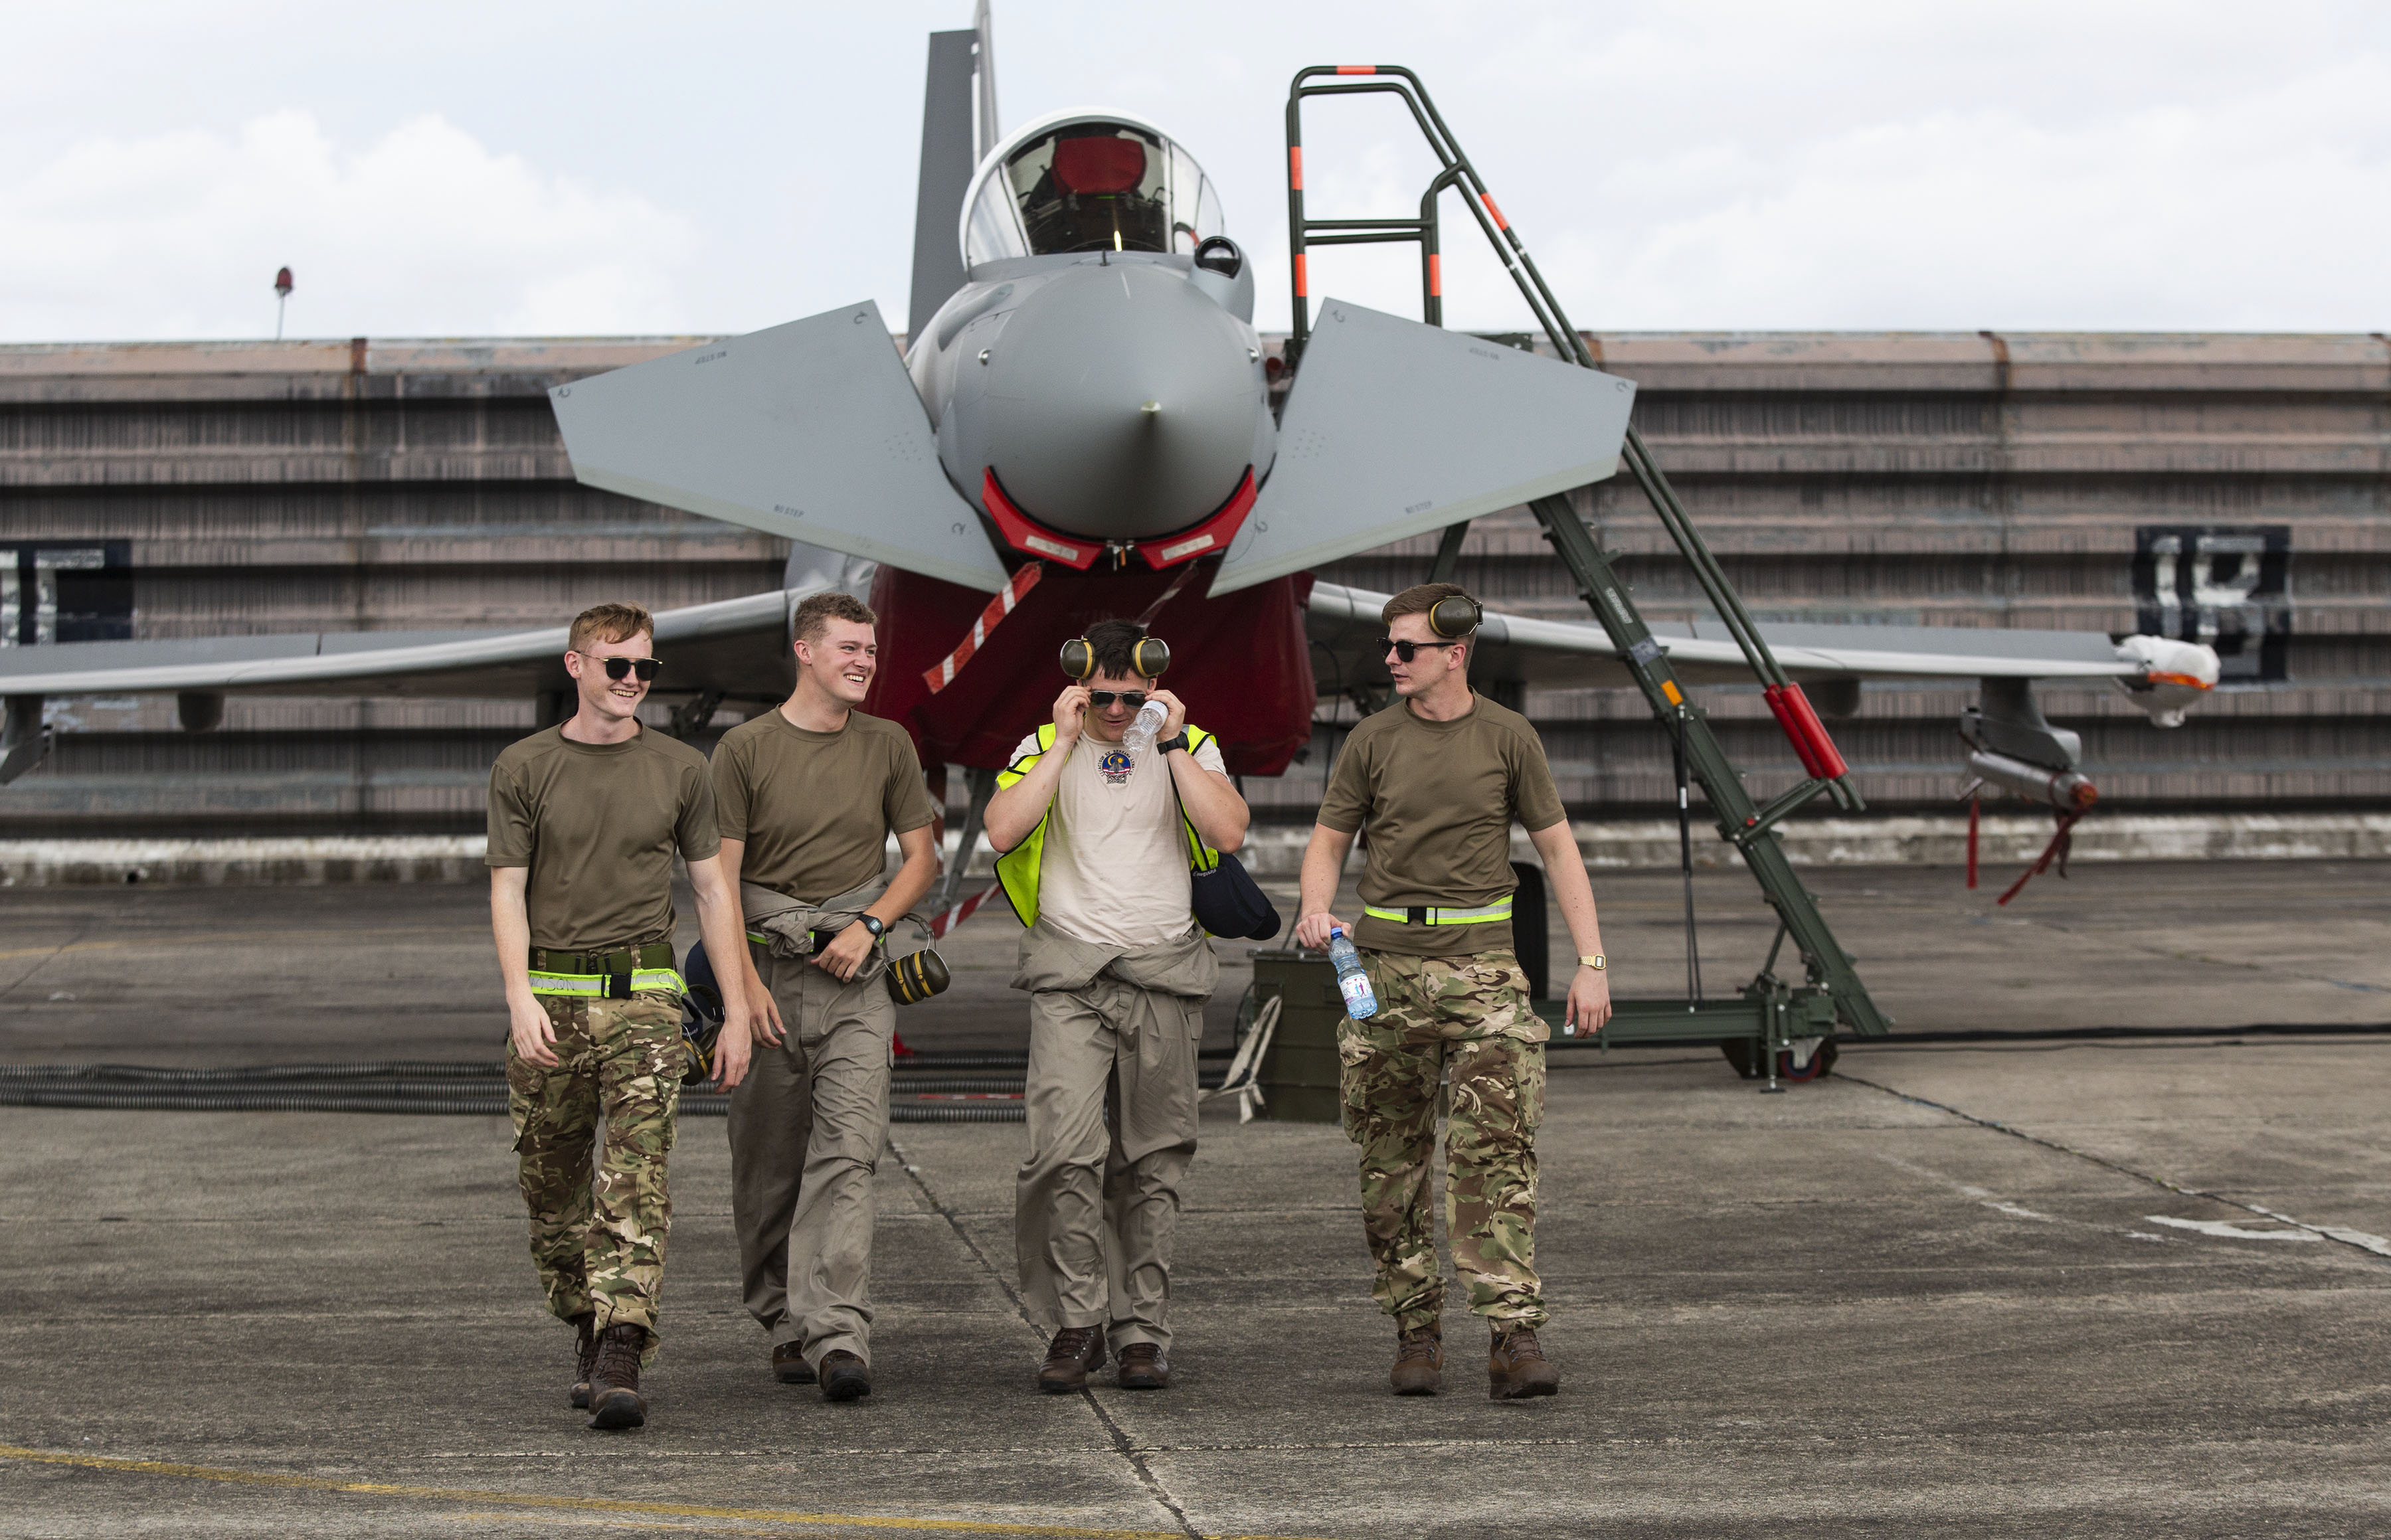 Typhoon pilots from RAF Lossiemouth are training in Malaysia ahead of an international military exercise.